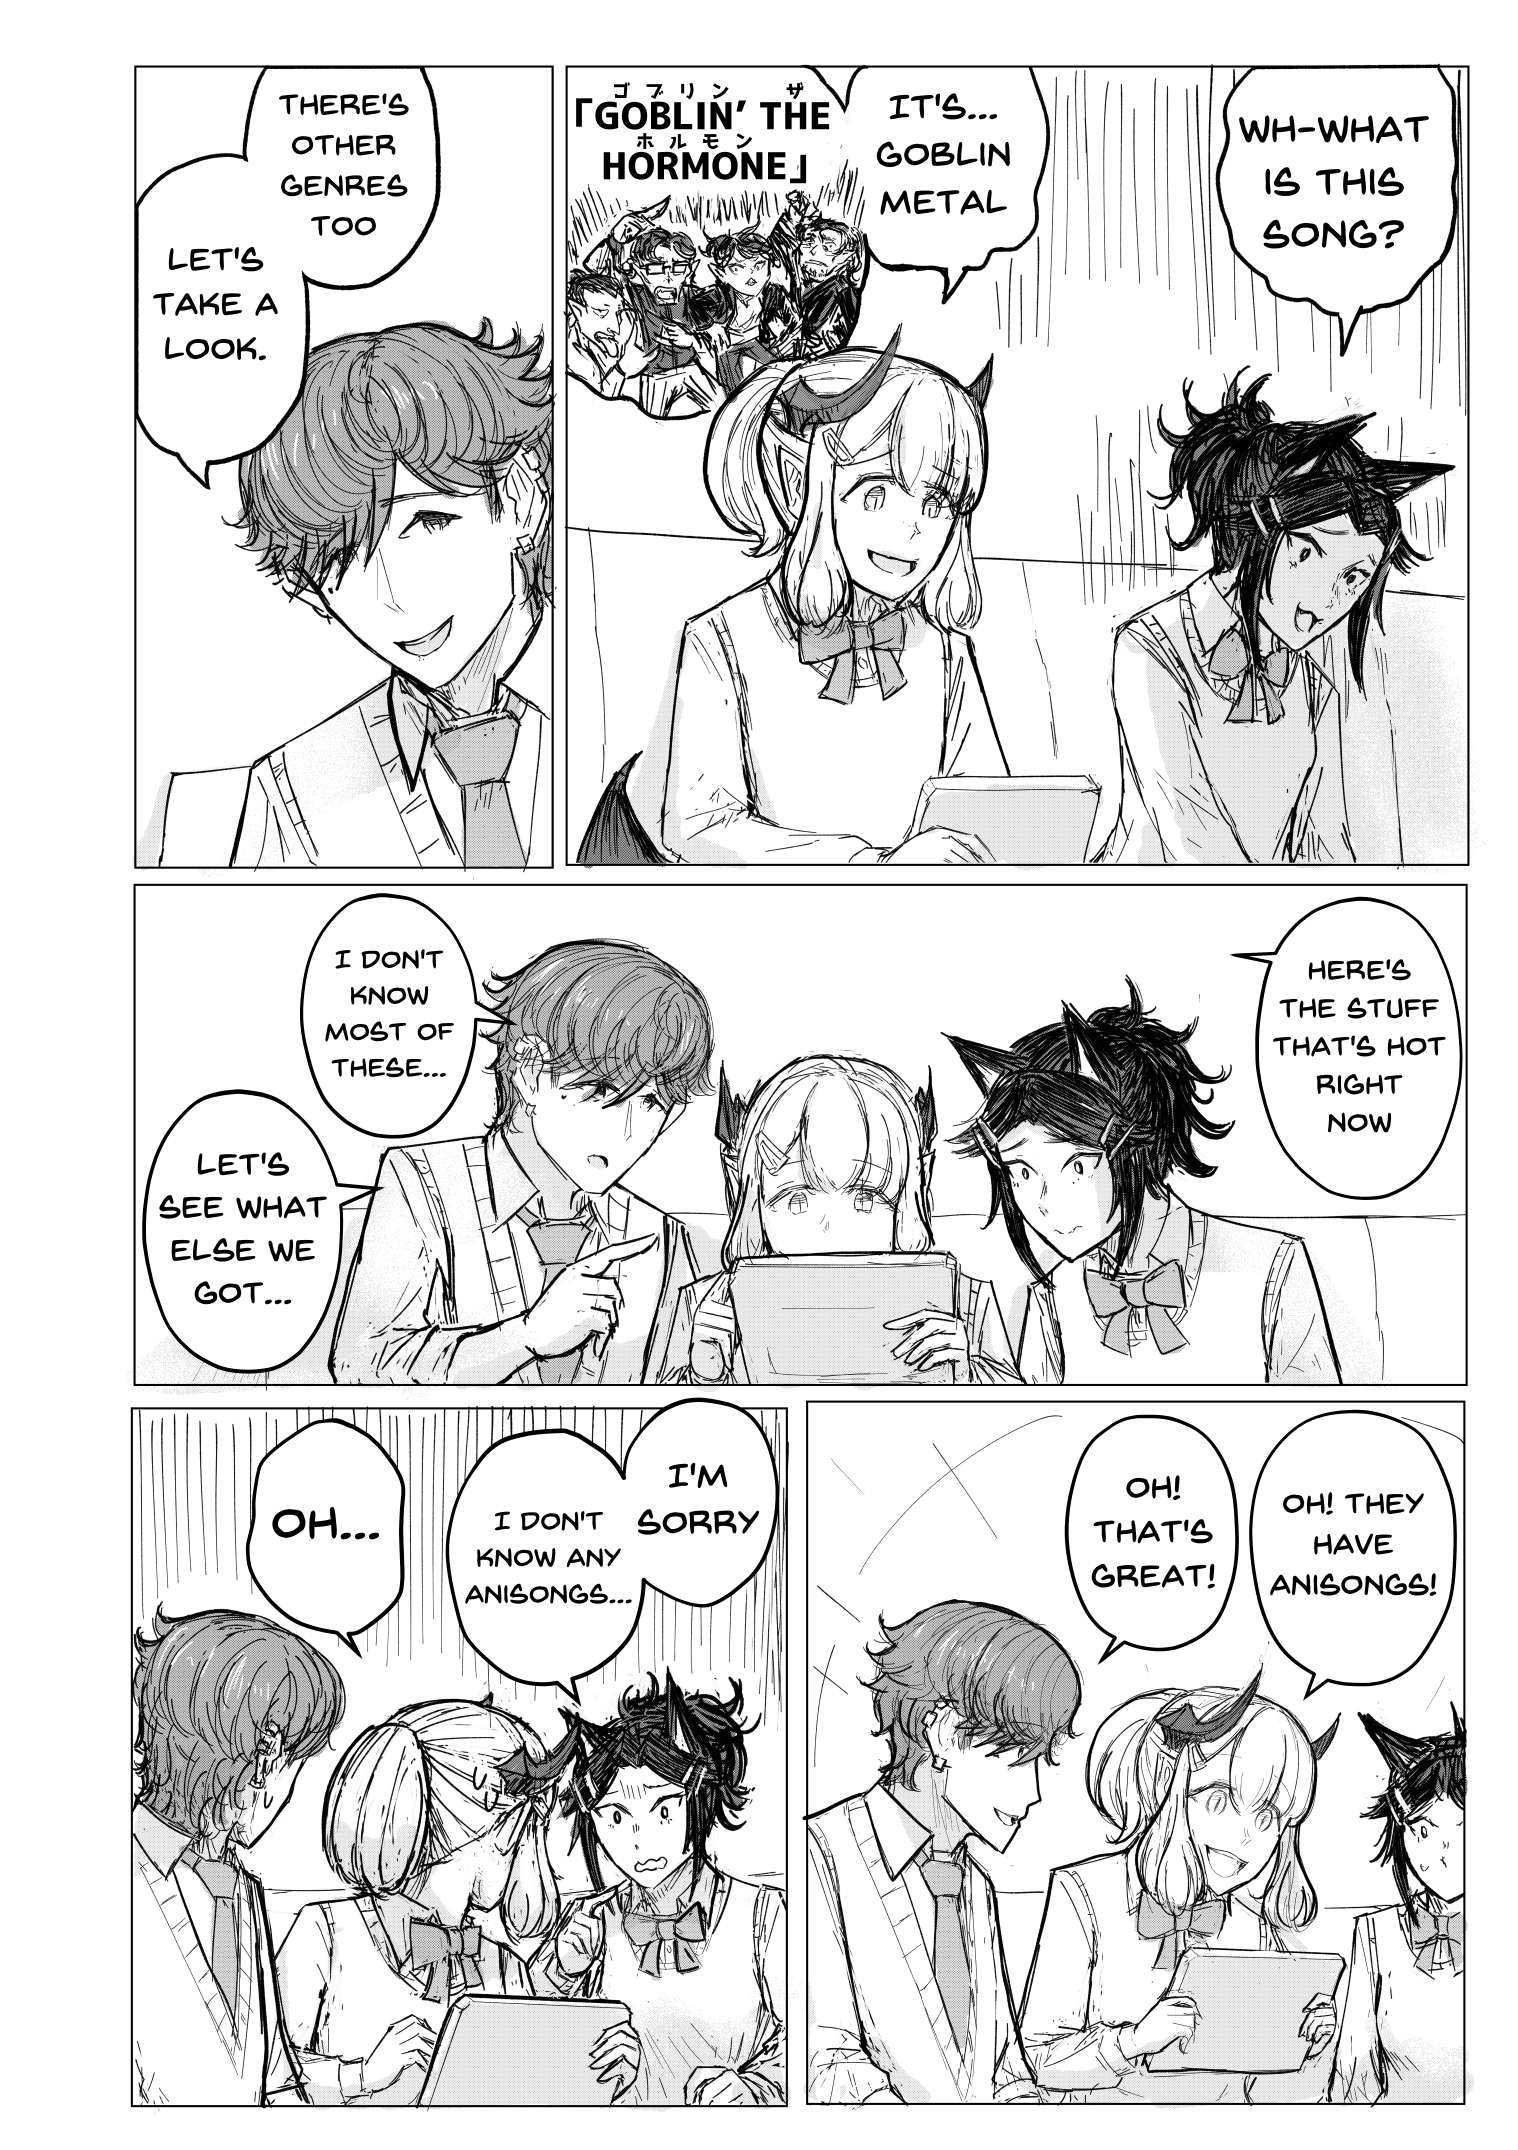 KANOIN: My Incubus (Girl)Friend - chapter 9 - #4